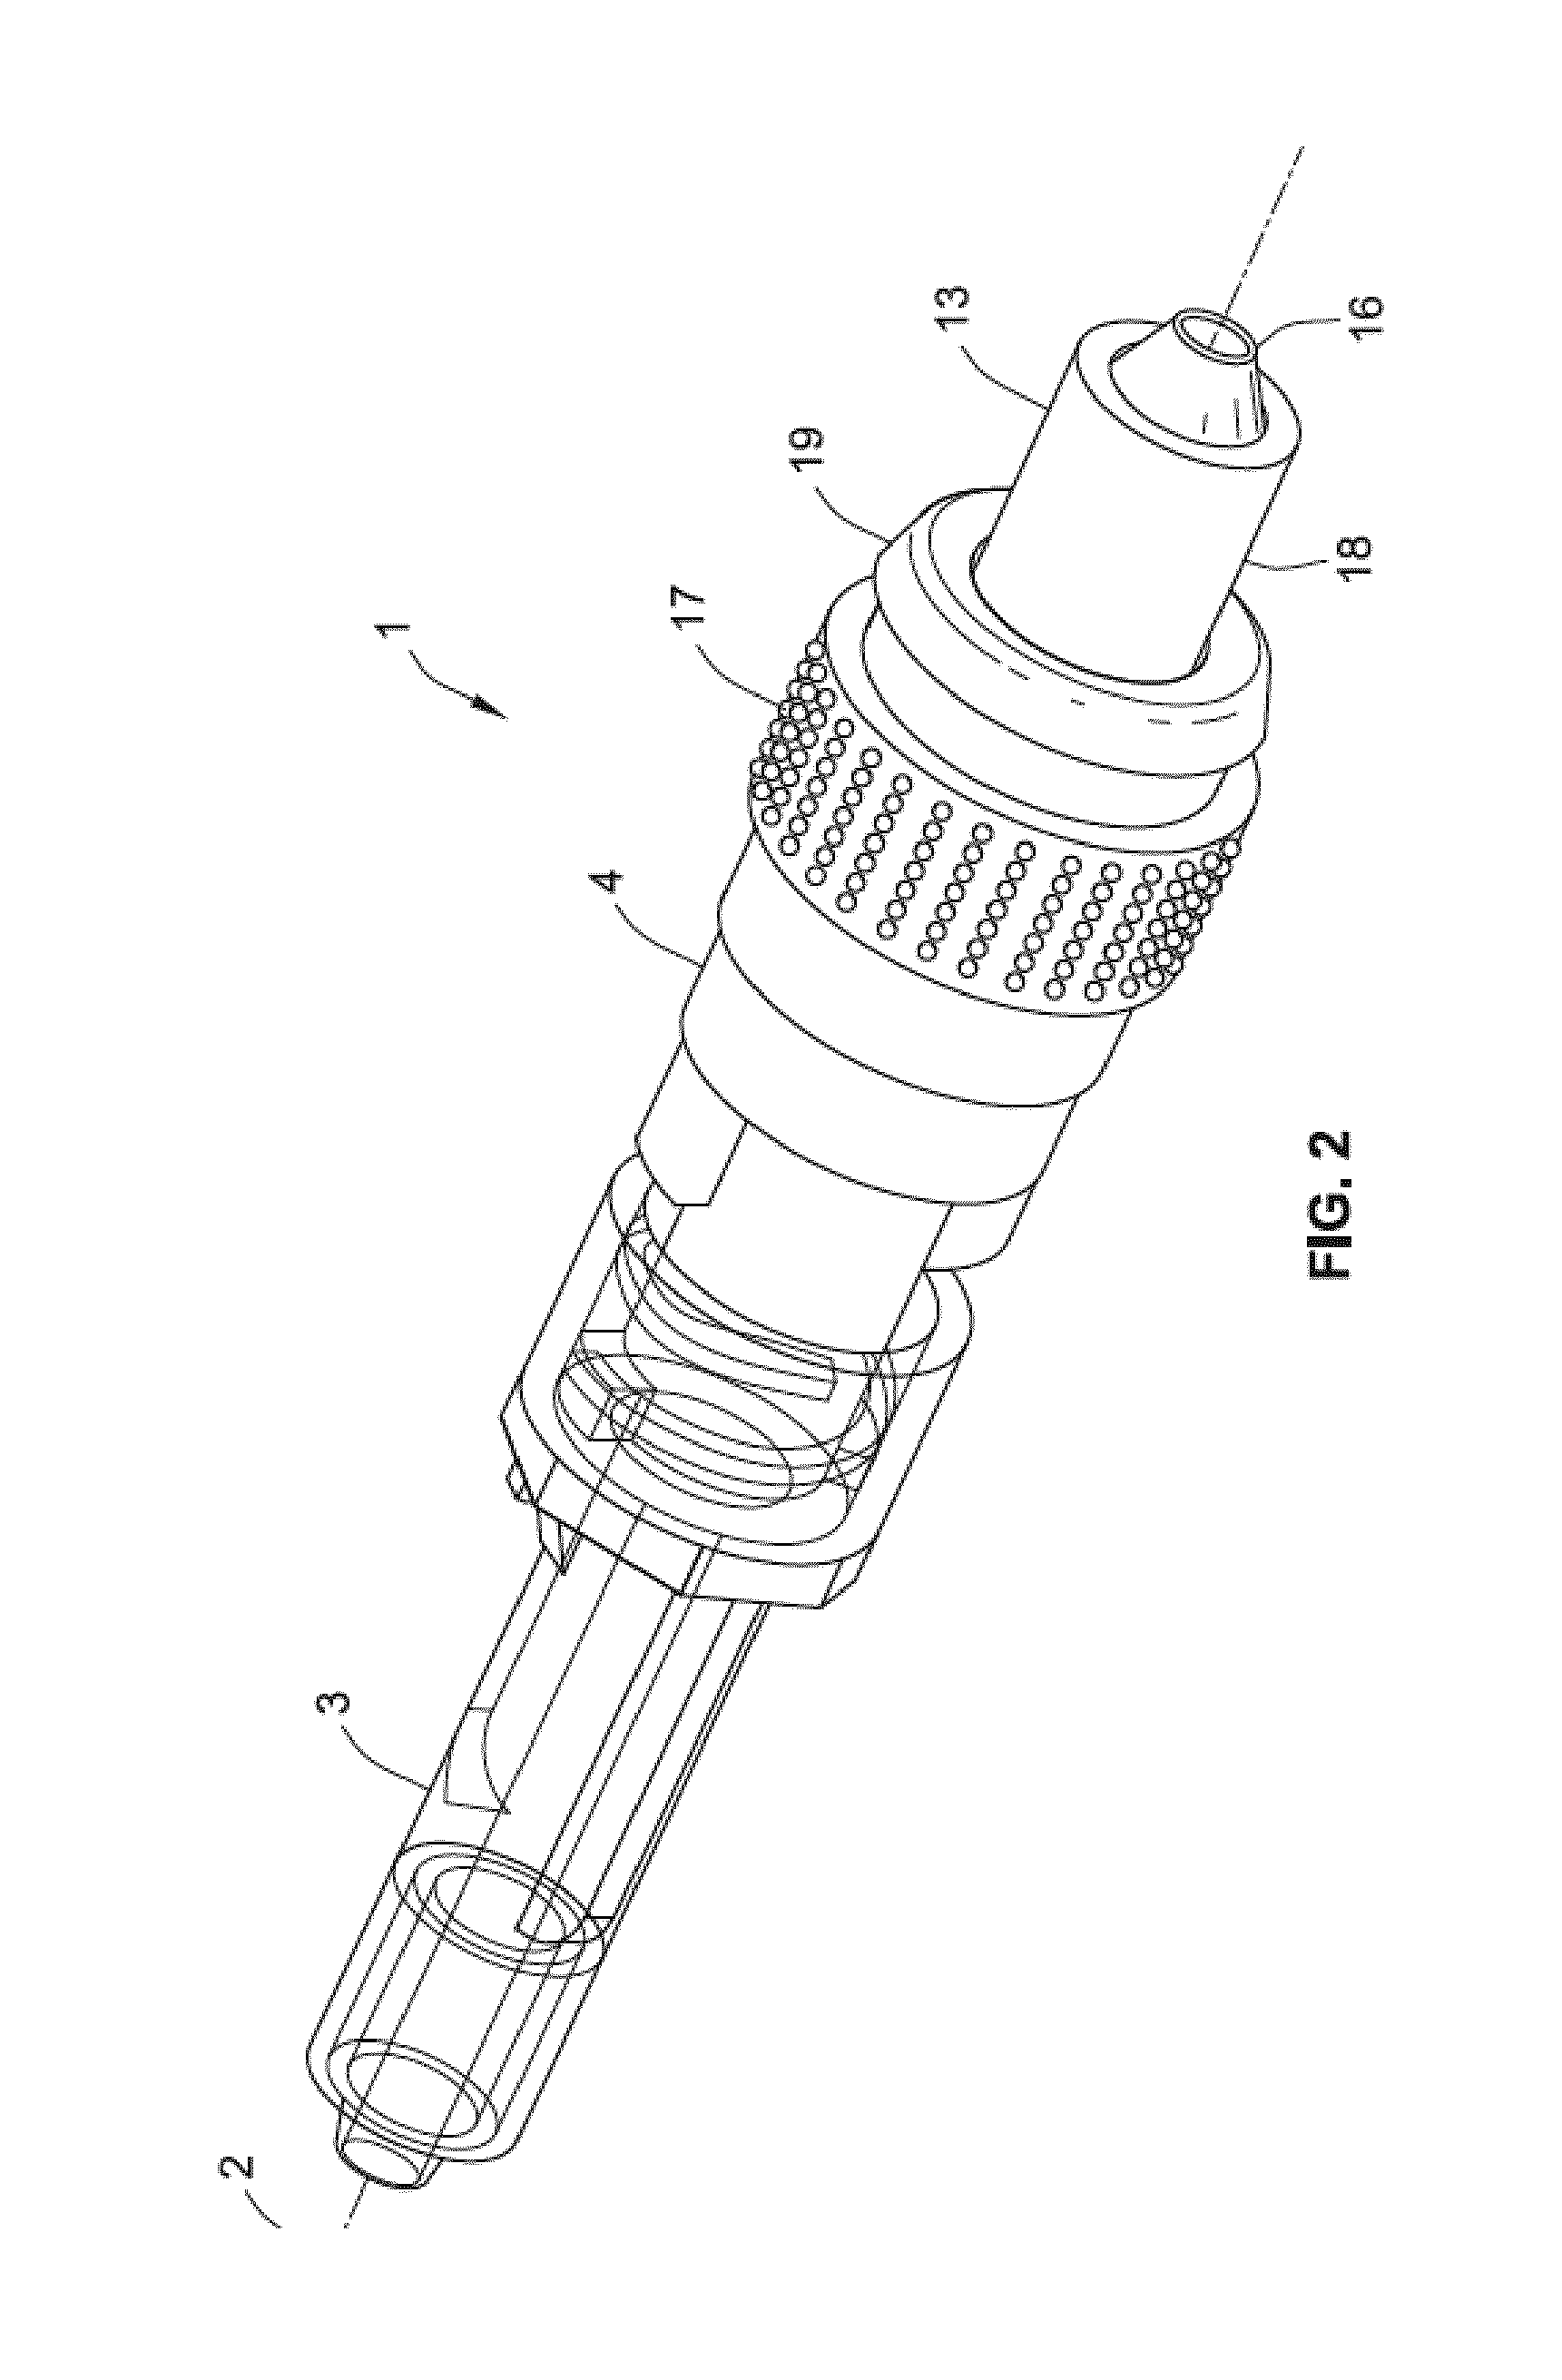 Strain relieving valve assembly with flow blocking